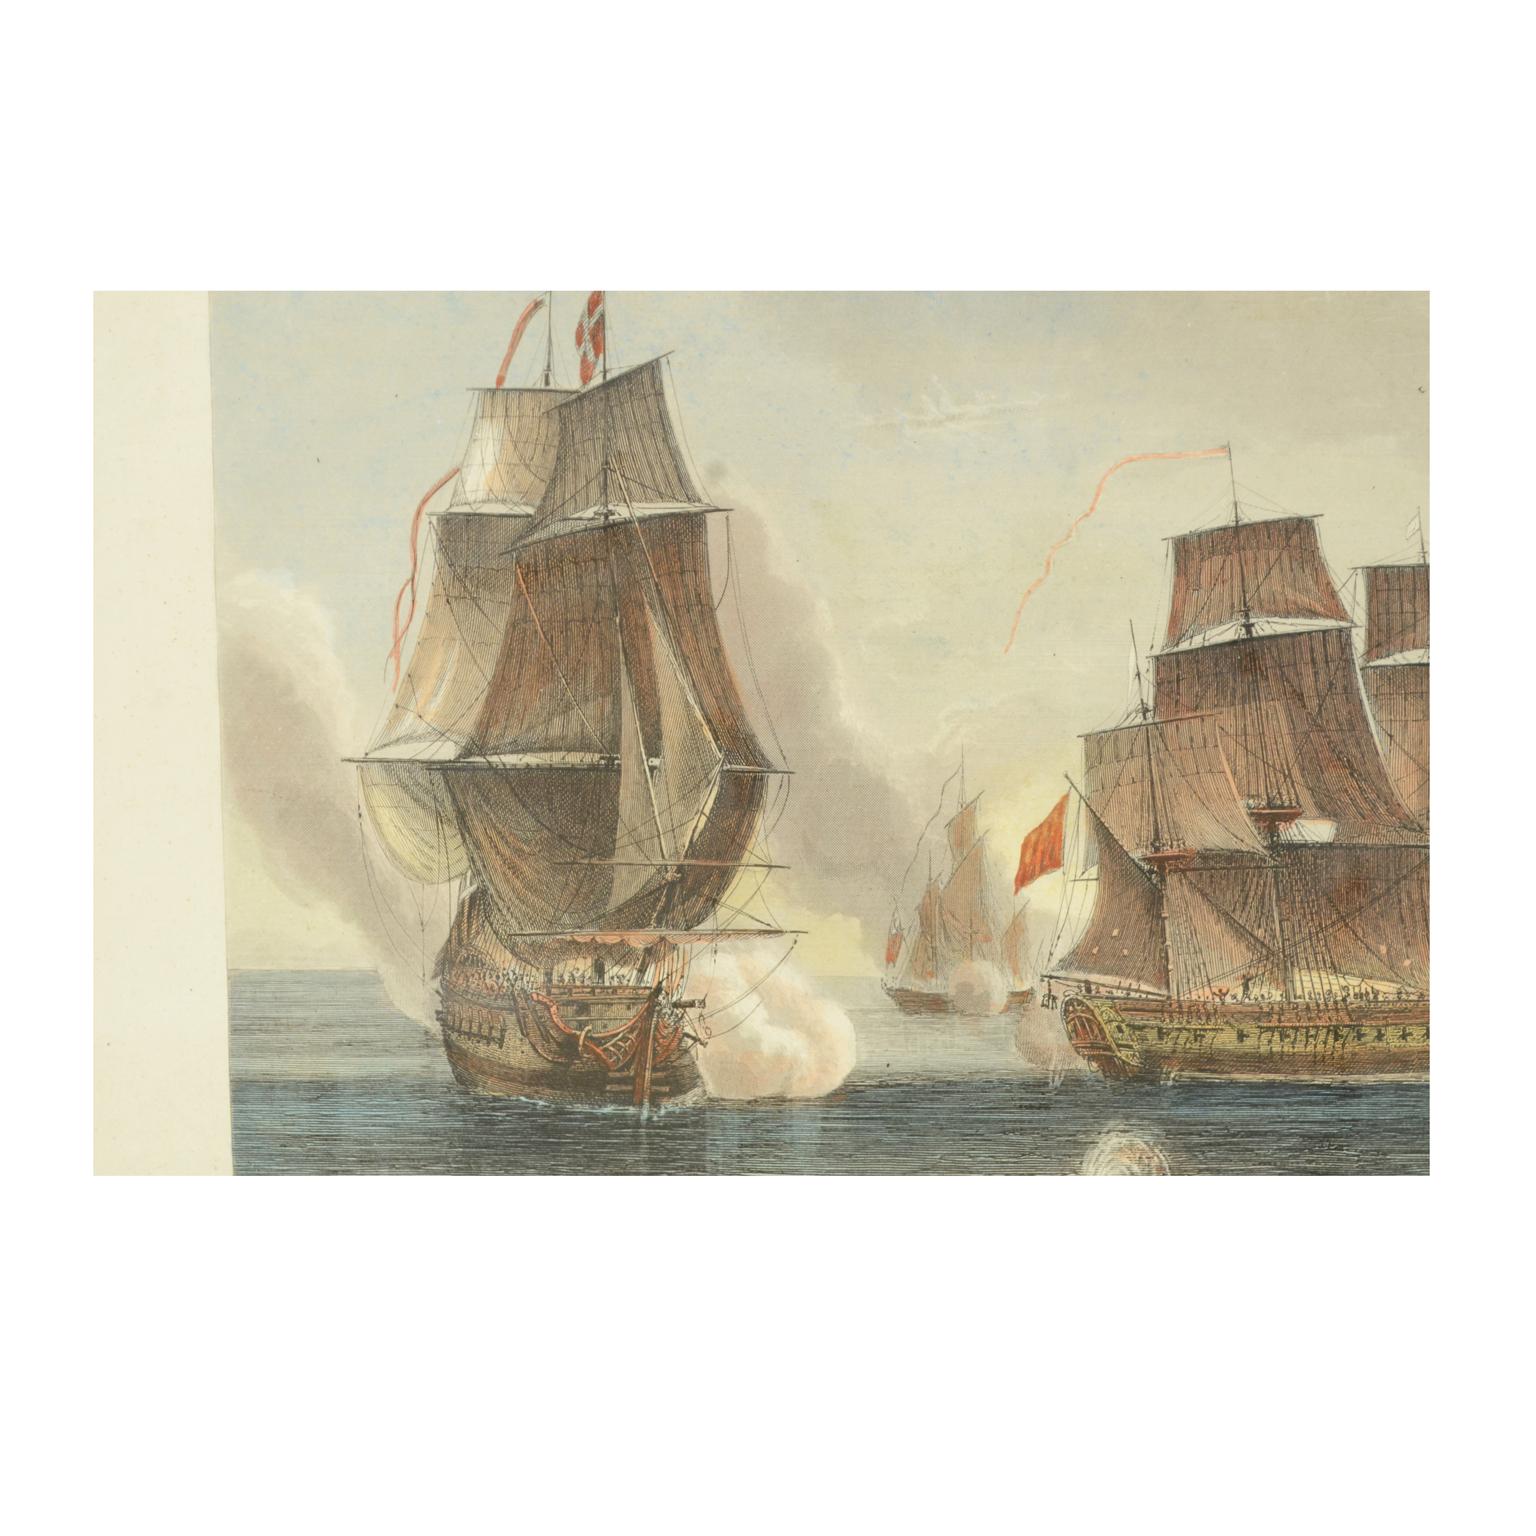 Paper 1900 Vintage Lithographic Print of the French Frigate Minerva Oakwood frame For Sale